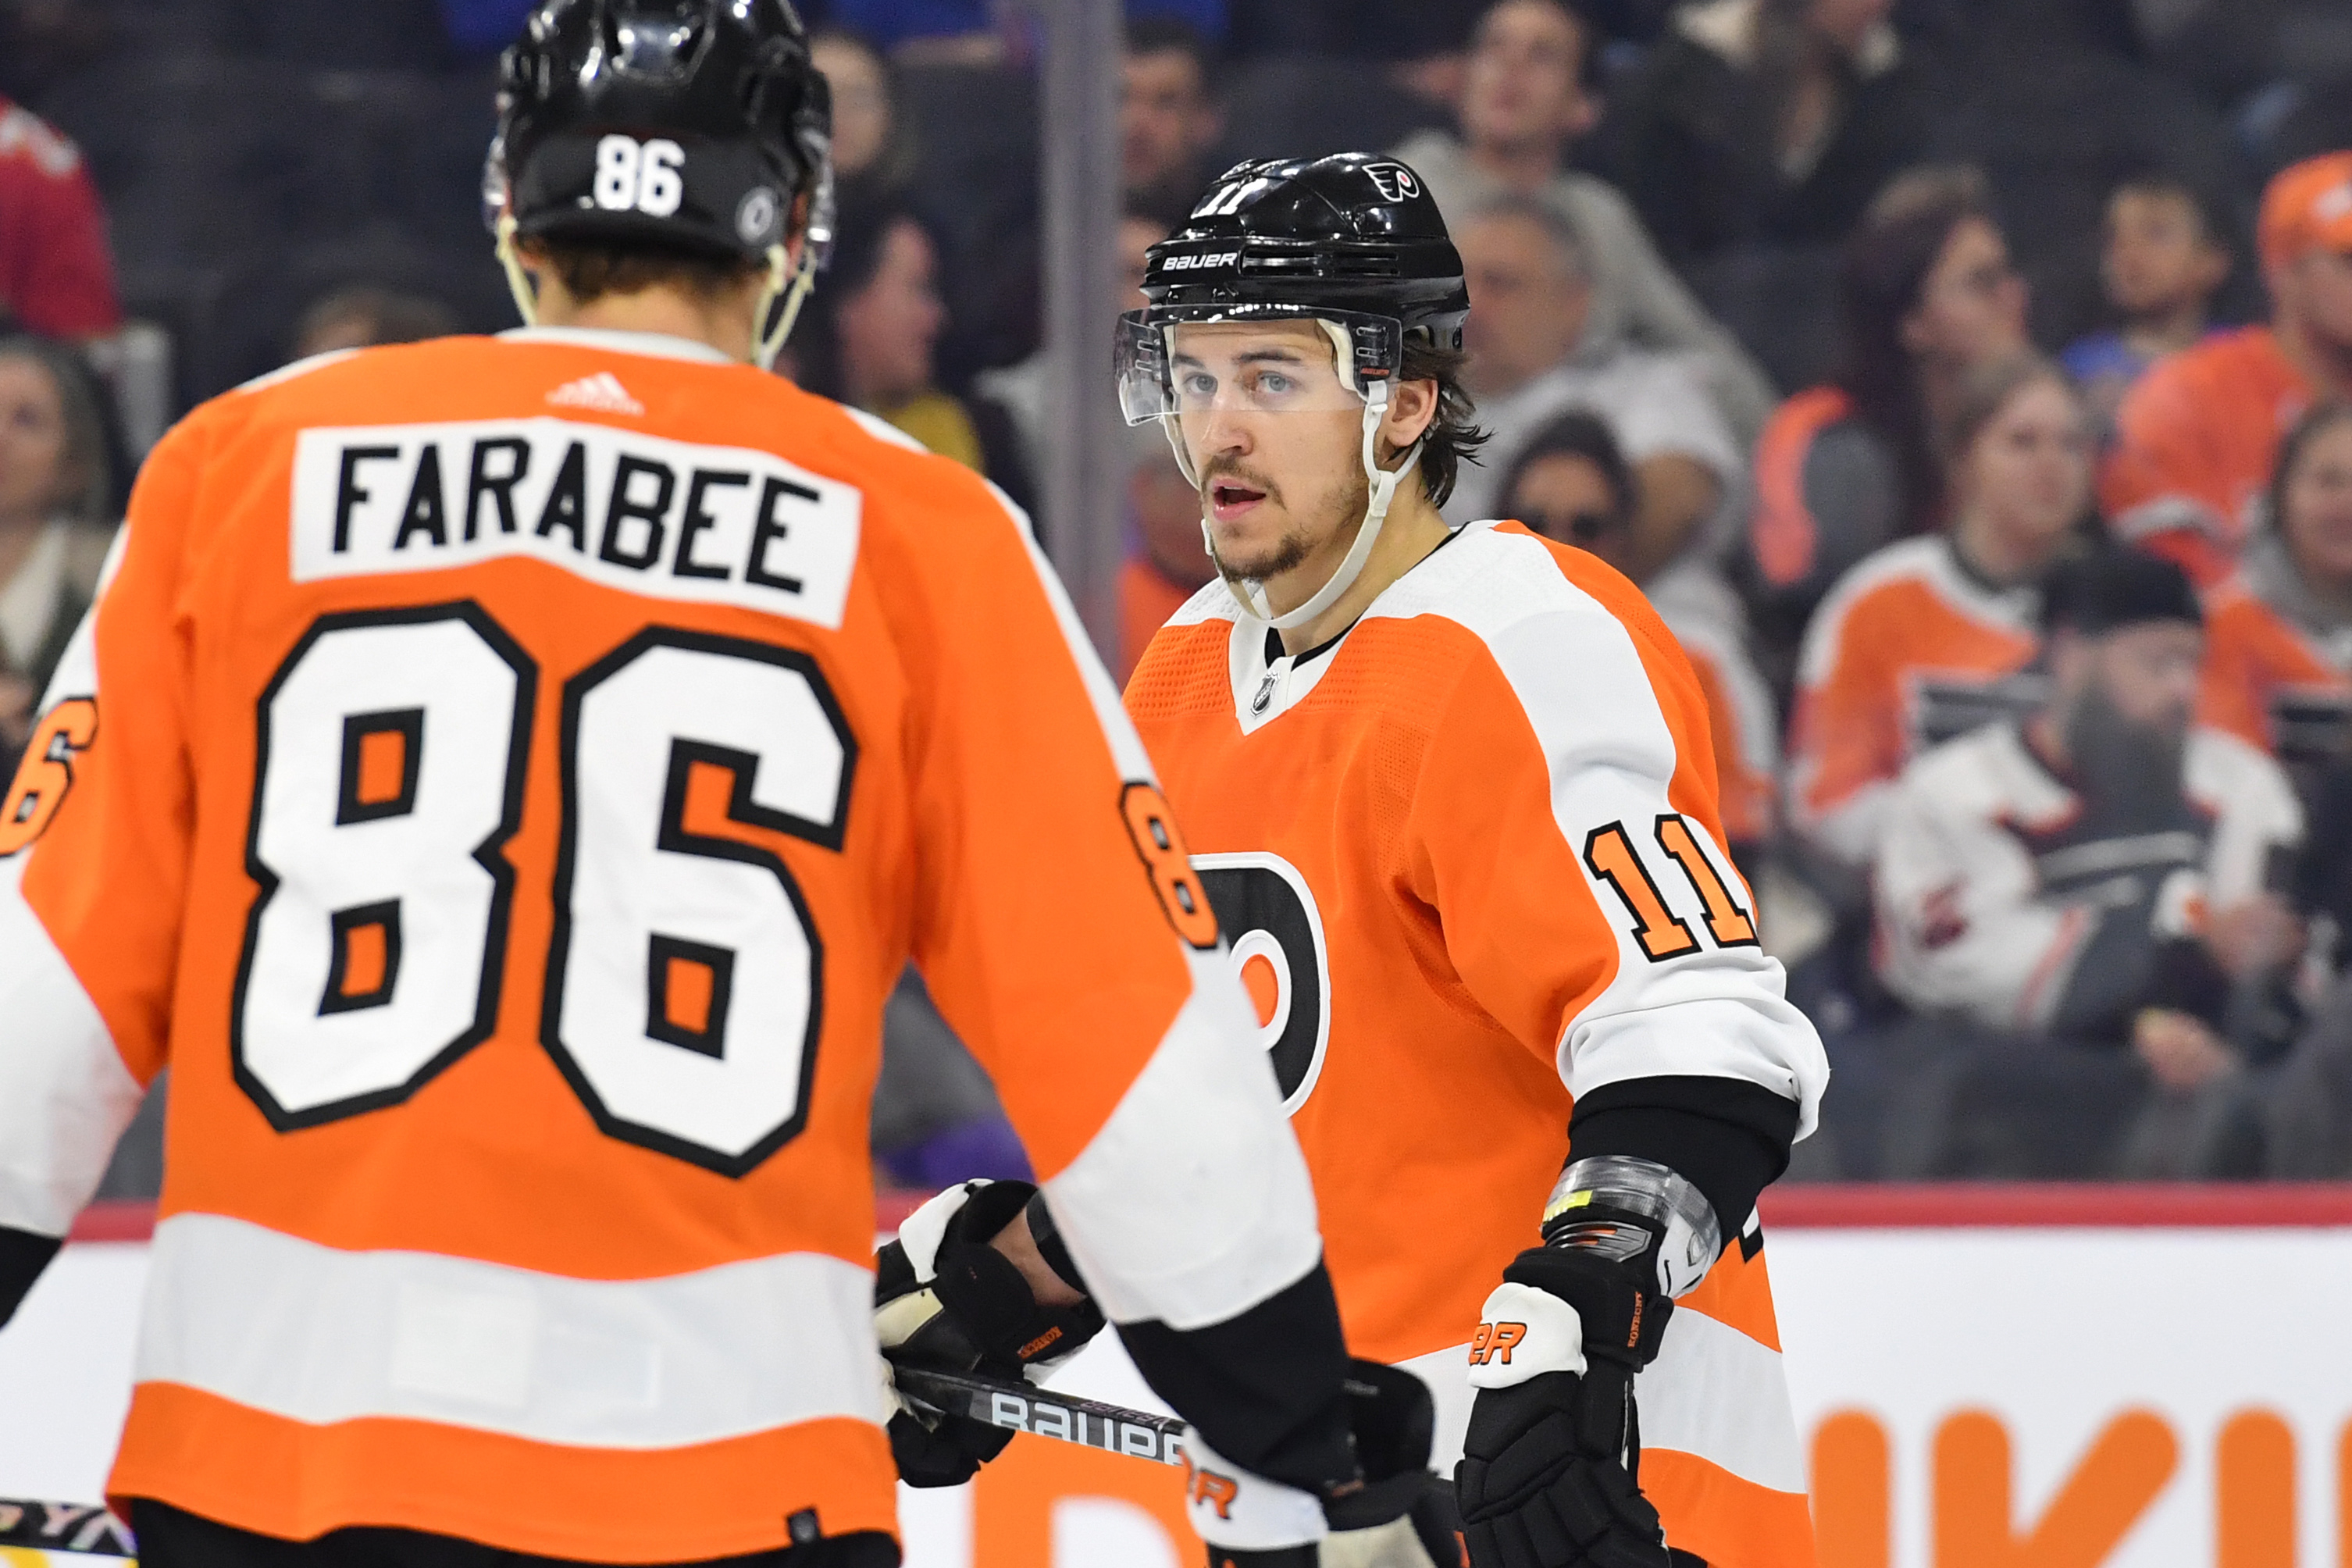 Flyers Rumors: Is an Ivan Provorov Trade Coming?